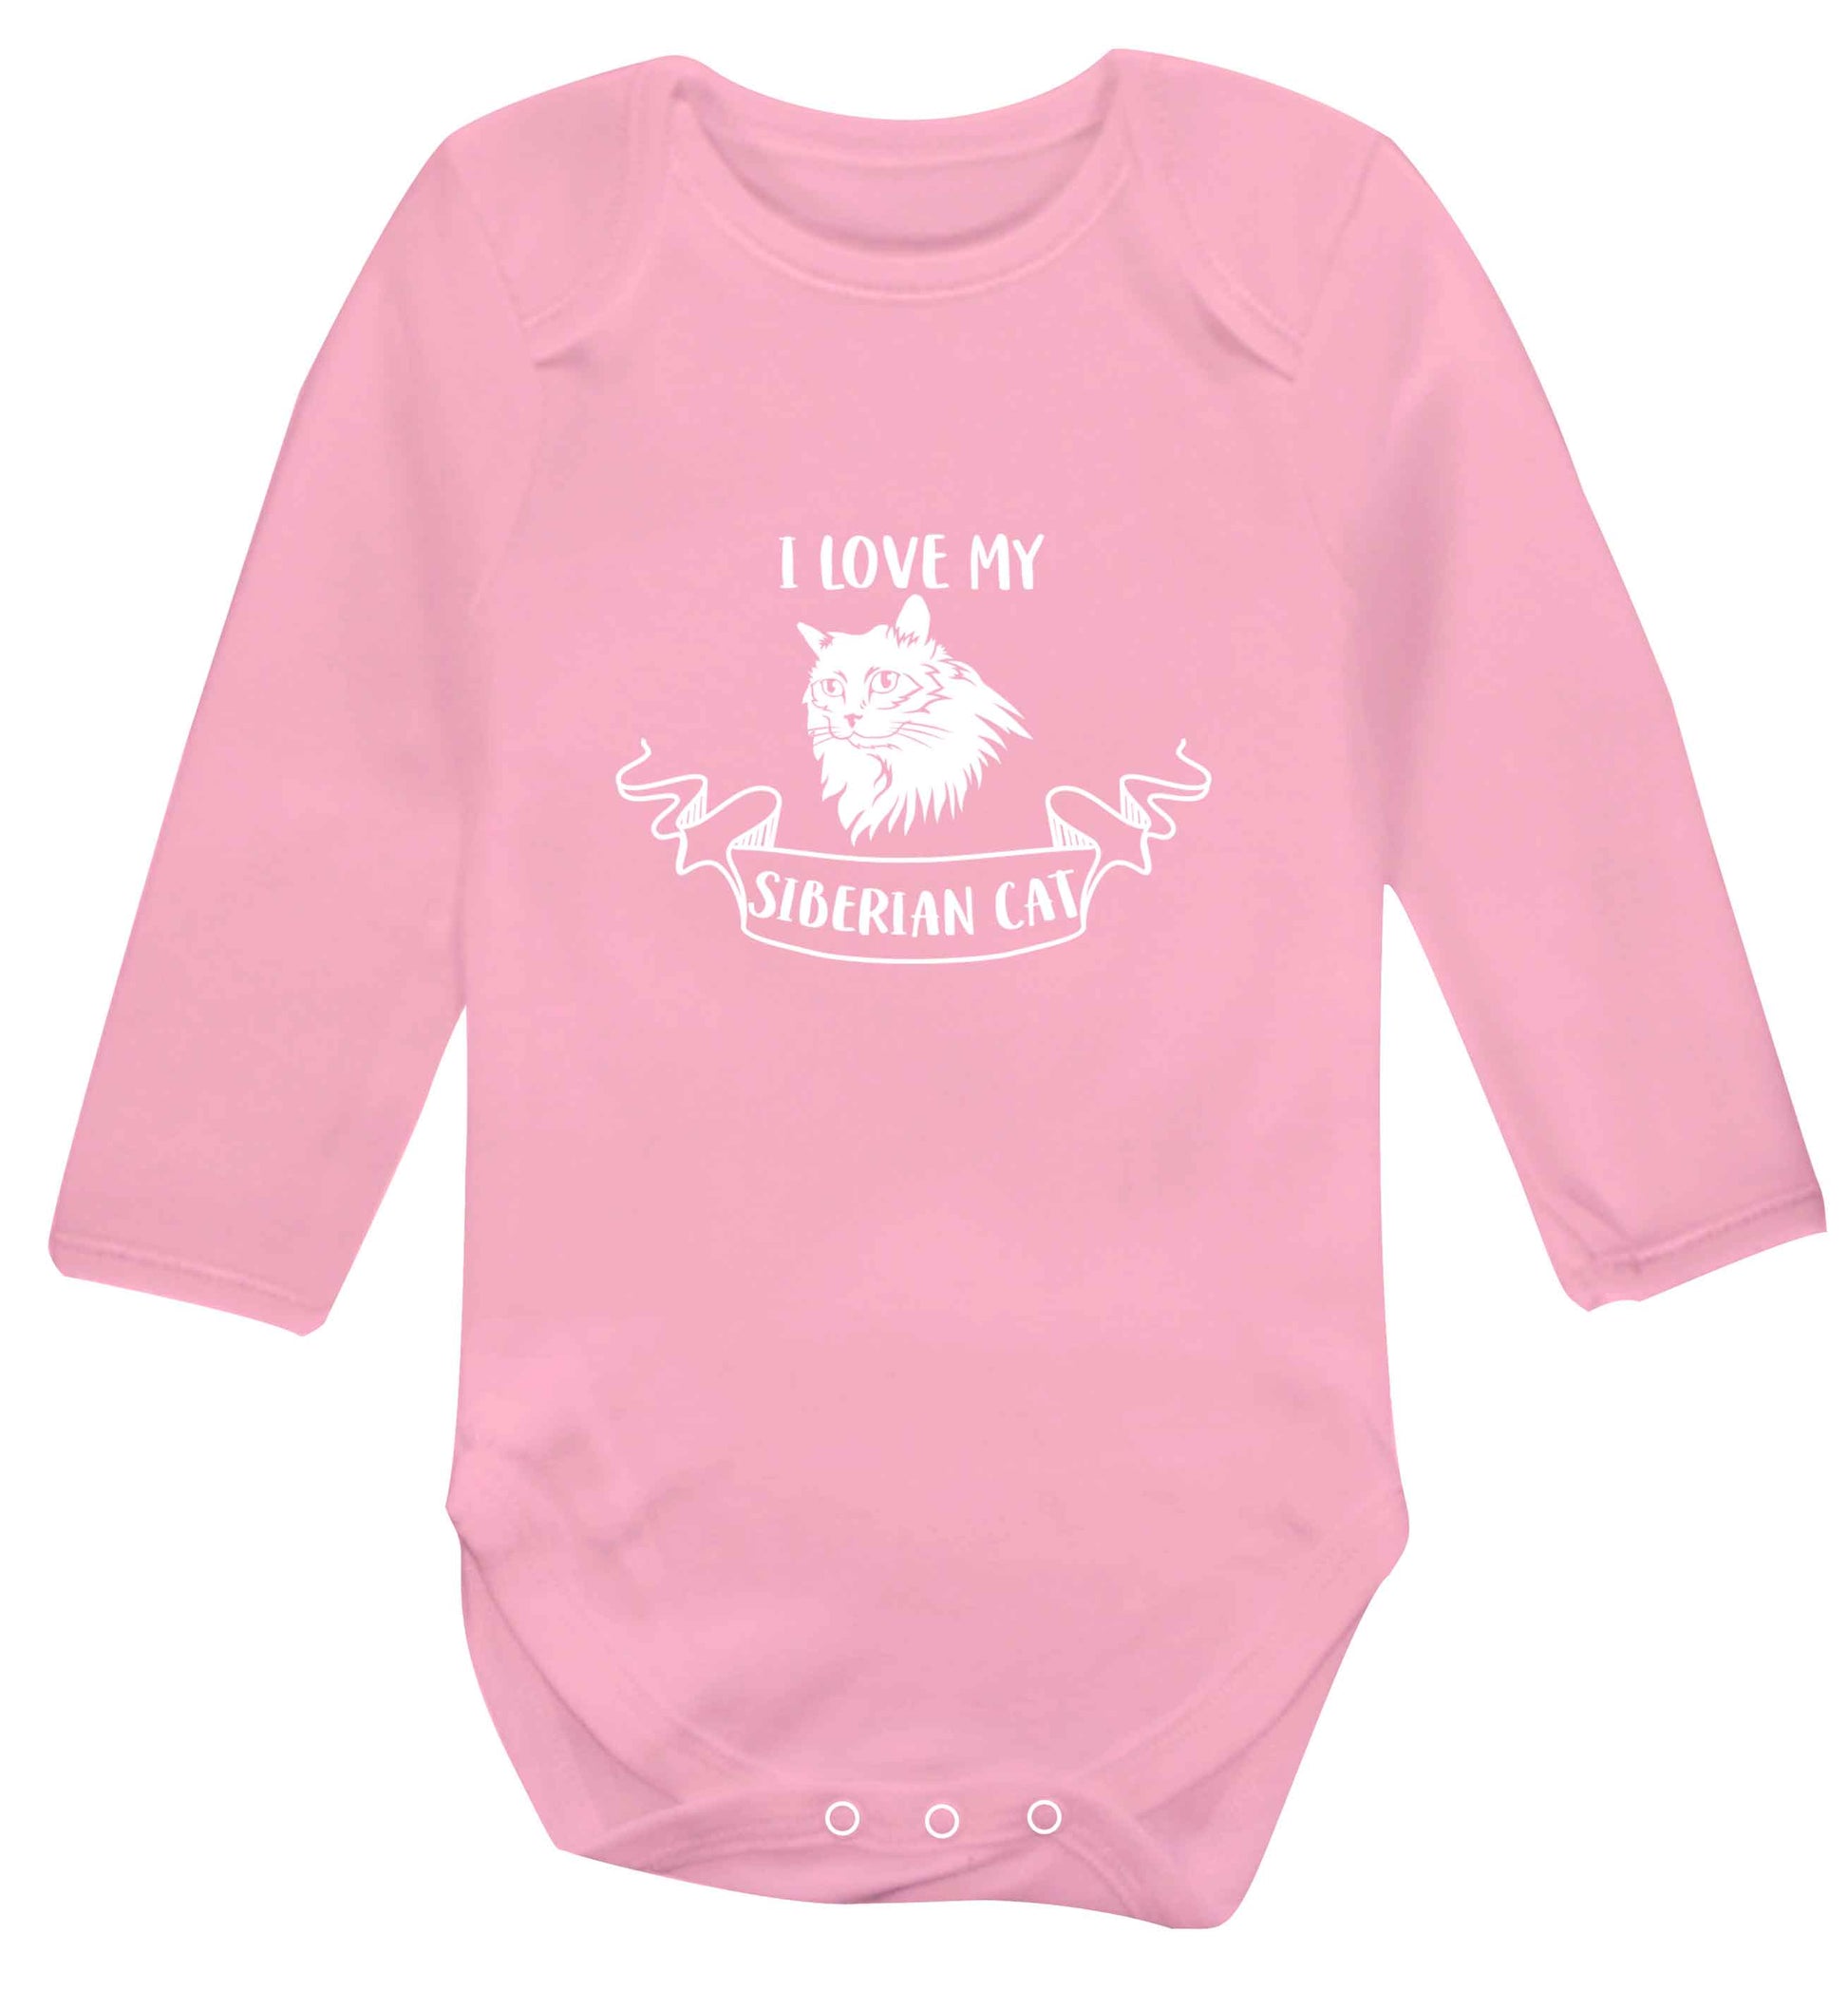 I love my siberian cat baby vest long sleeved pale pink 6-12 months